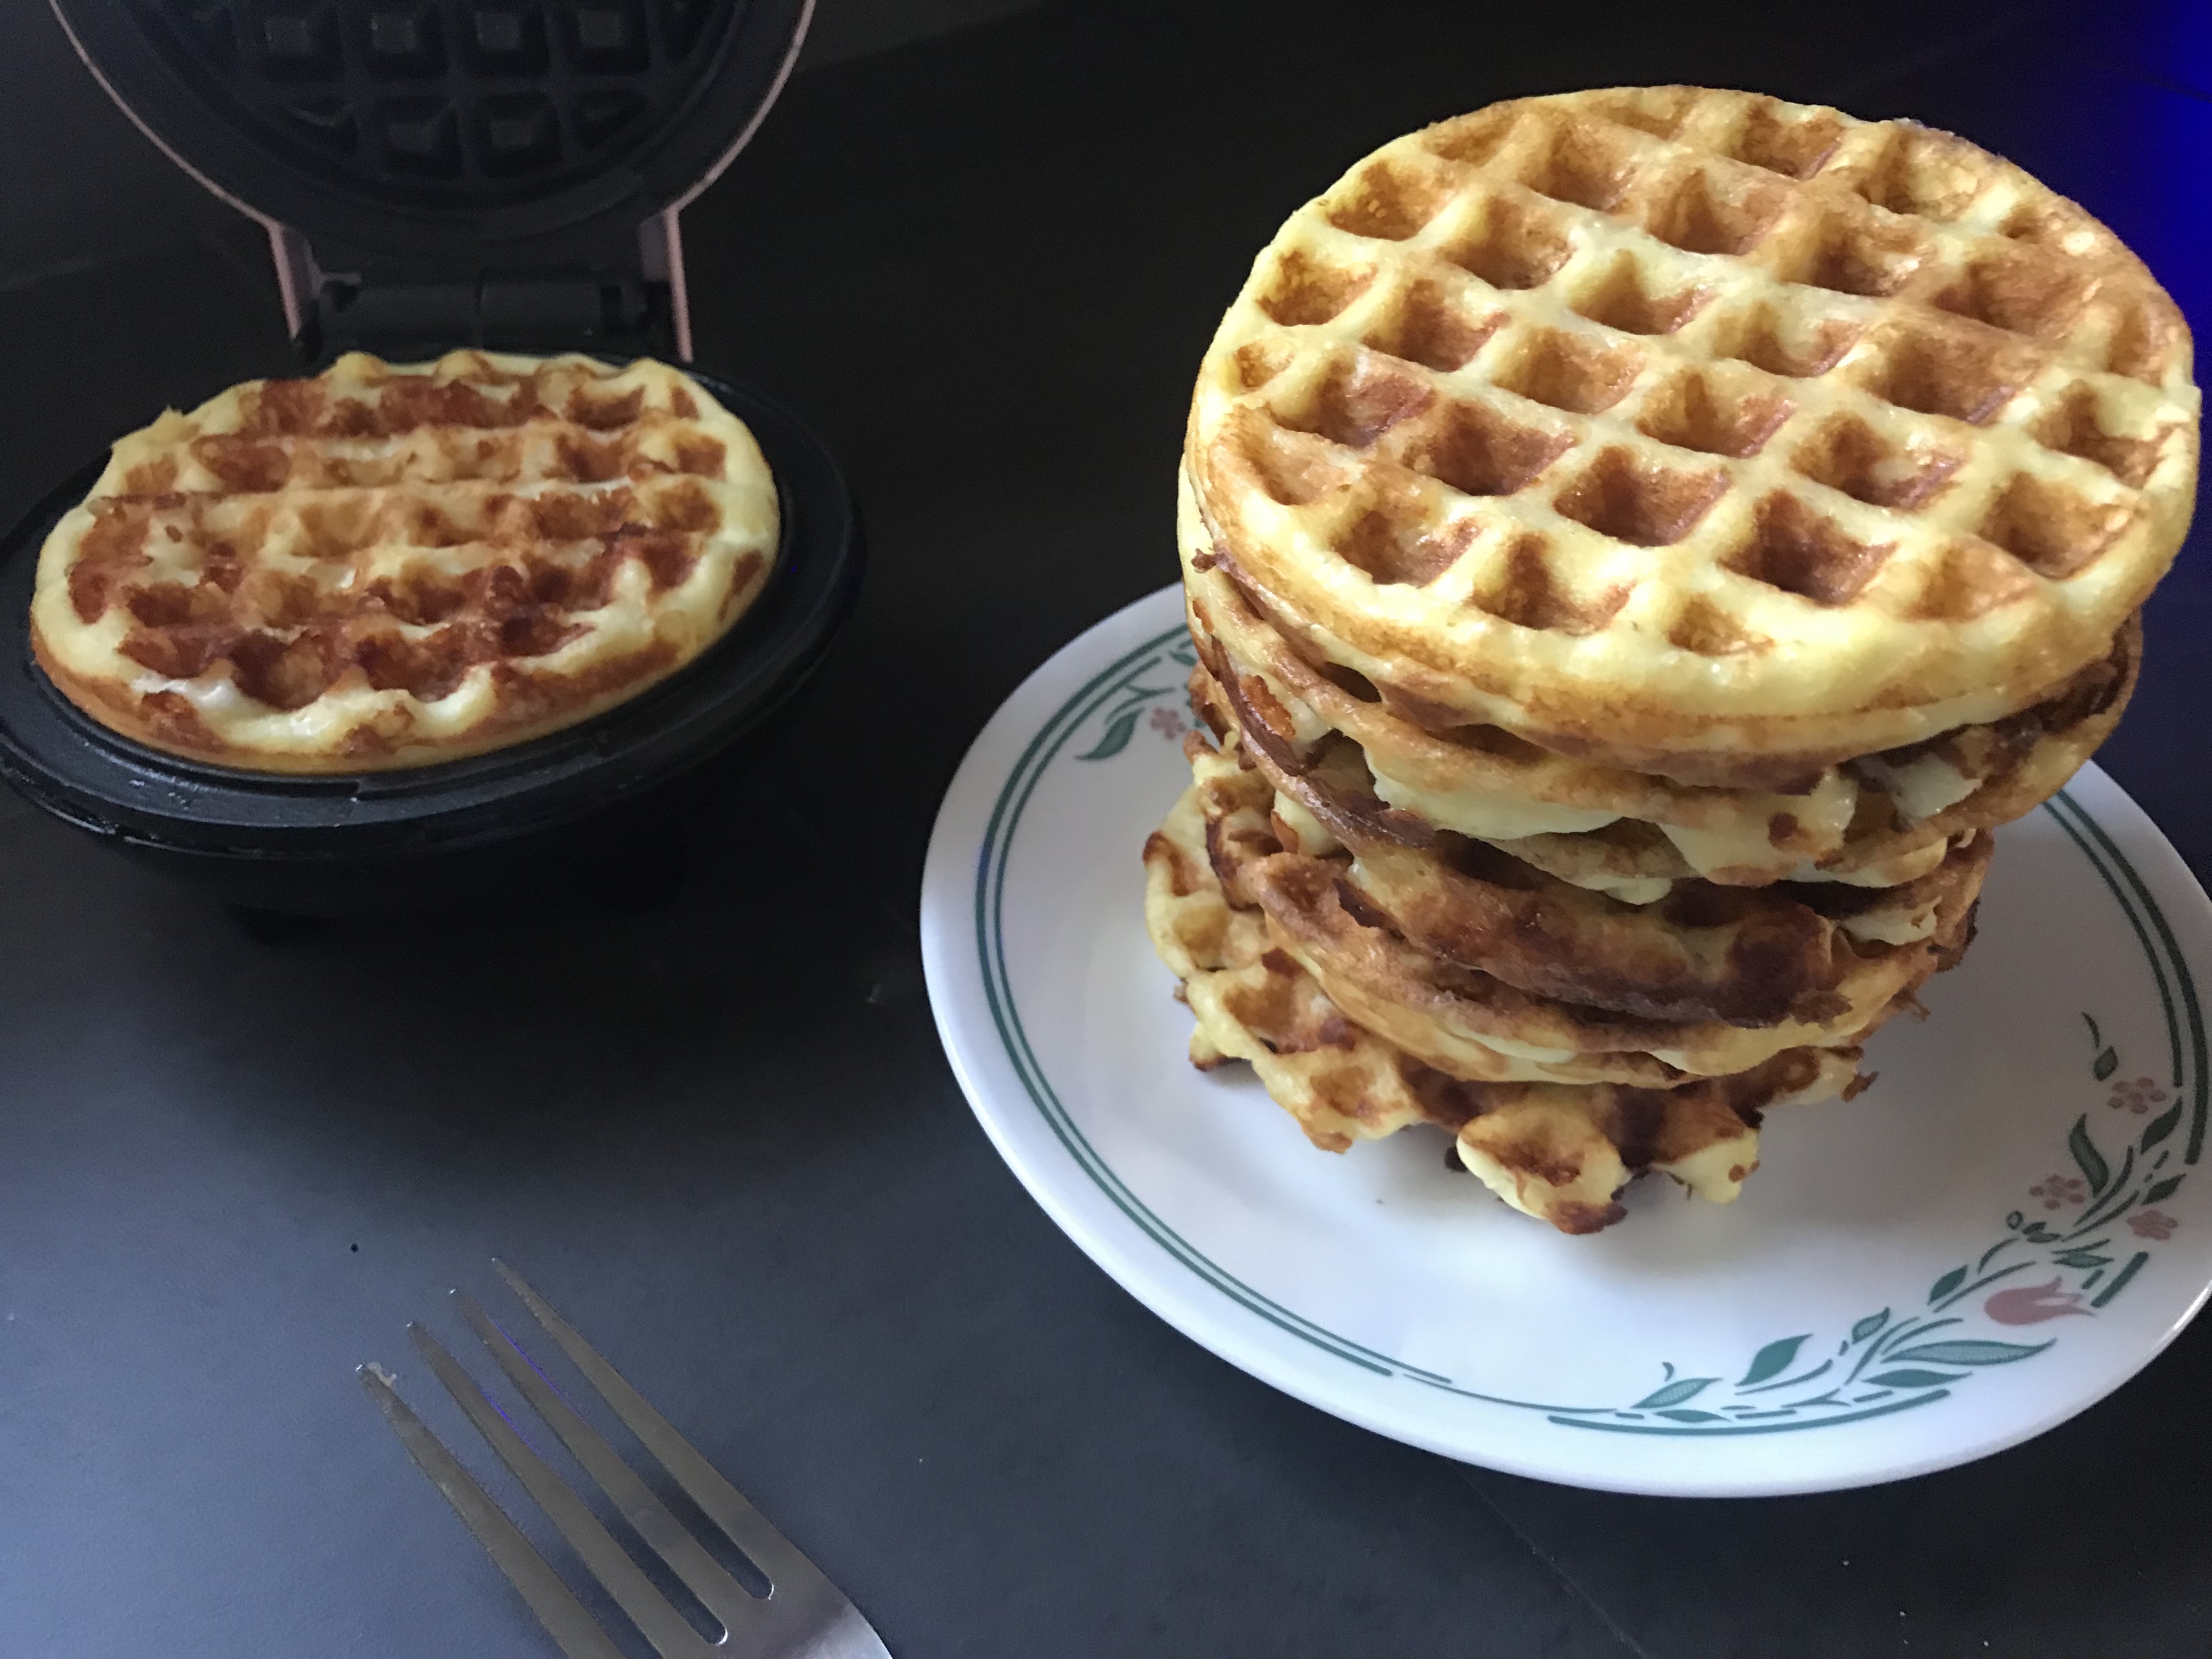 https://healthhomeandhappiness.com/wp-content/uploads/2019/09/2carnivore-chaffles.jpg